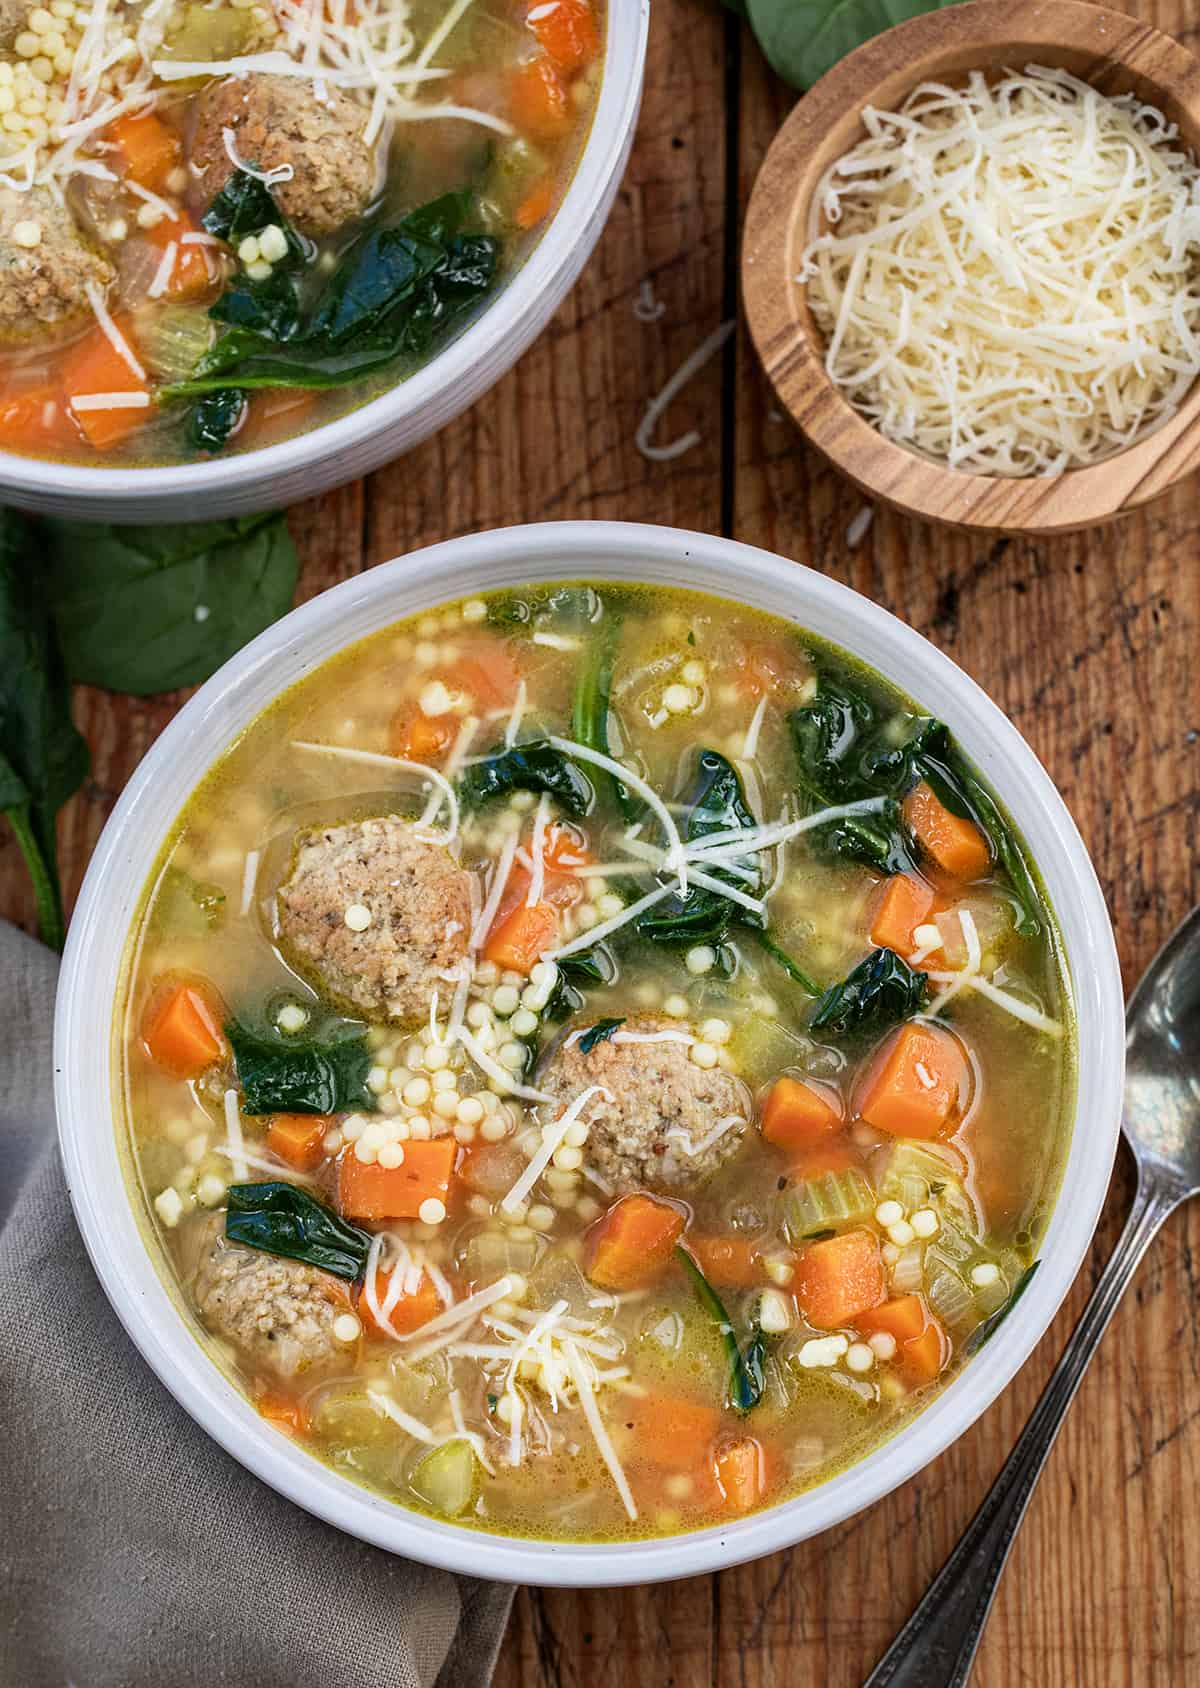 Bowls of Italian Wedding Soup on a wooden table.